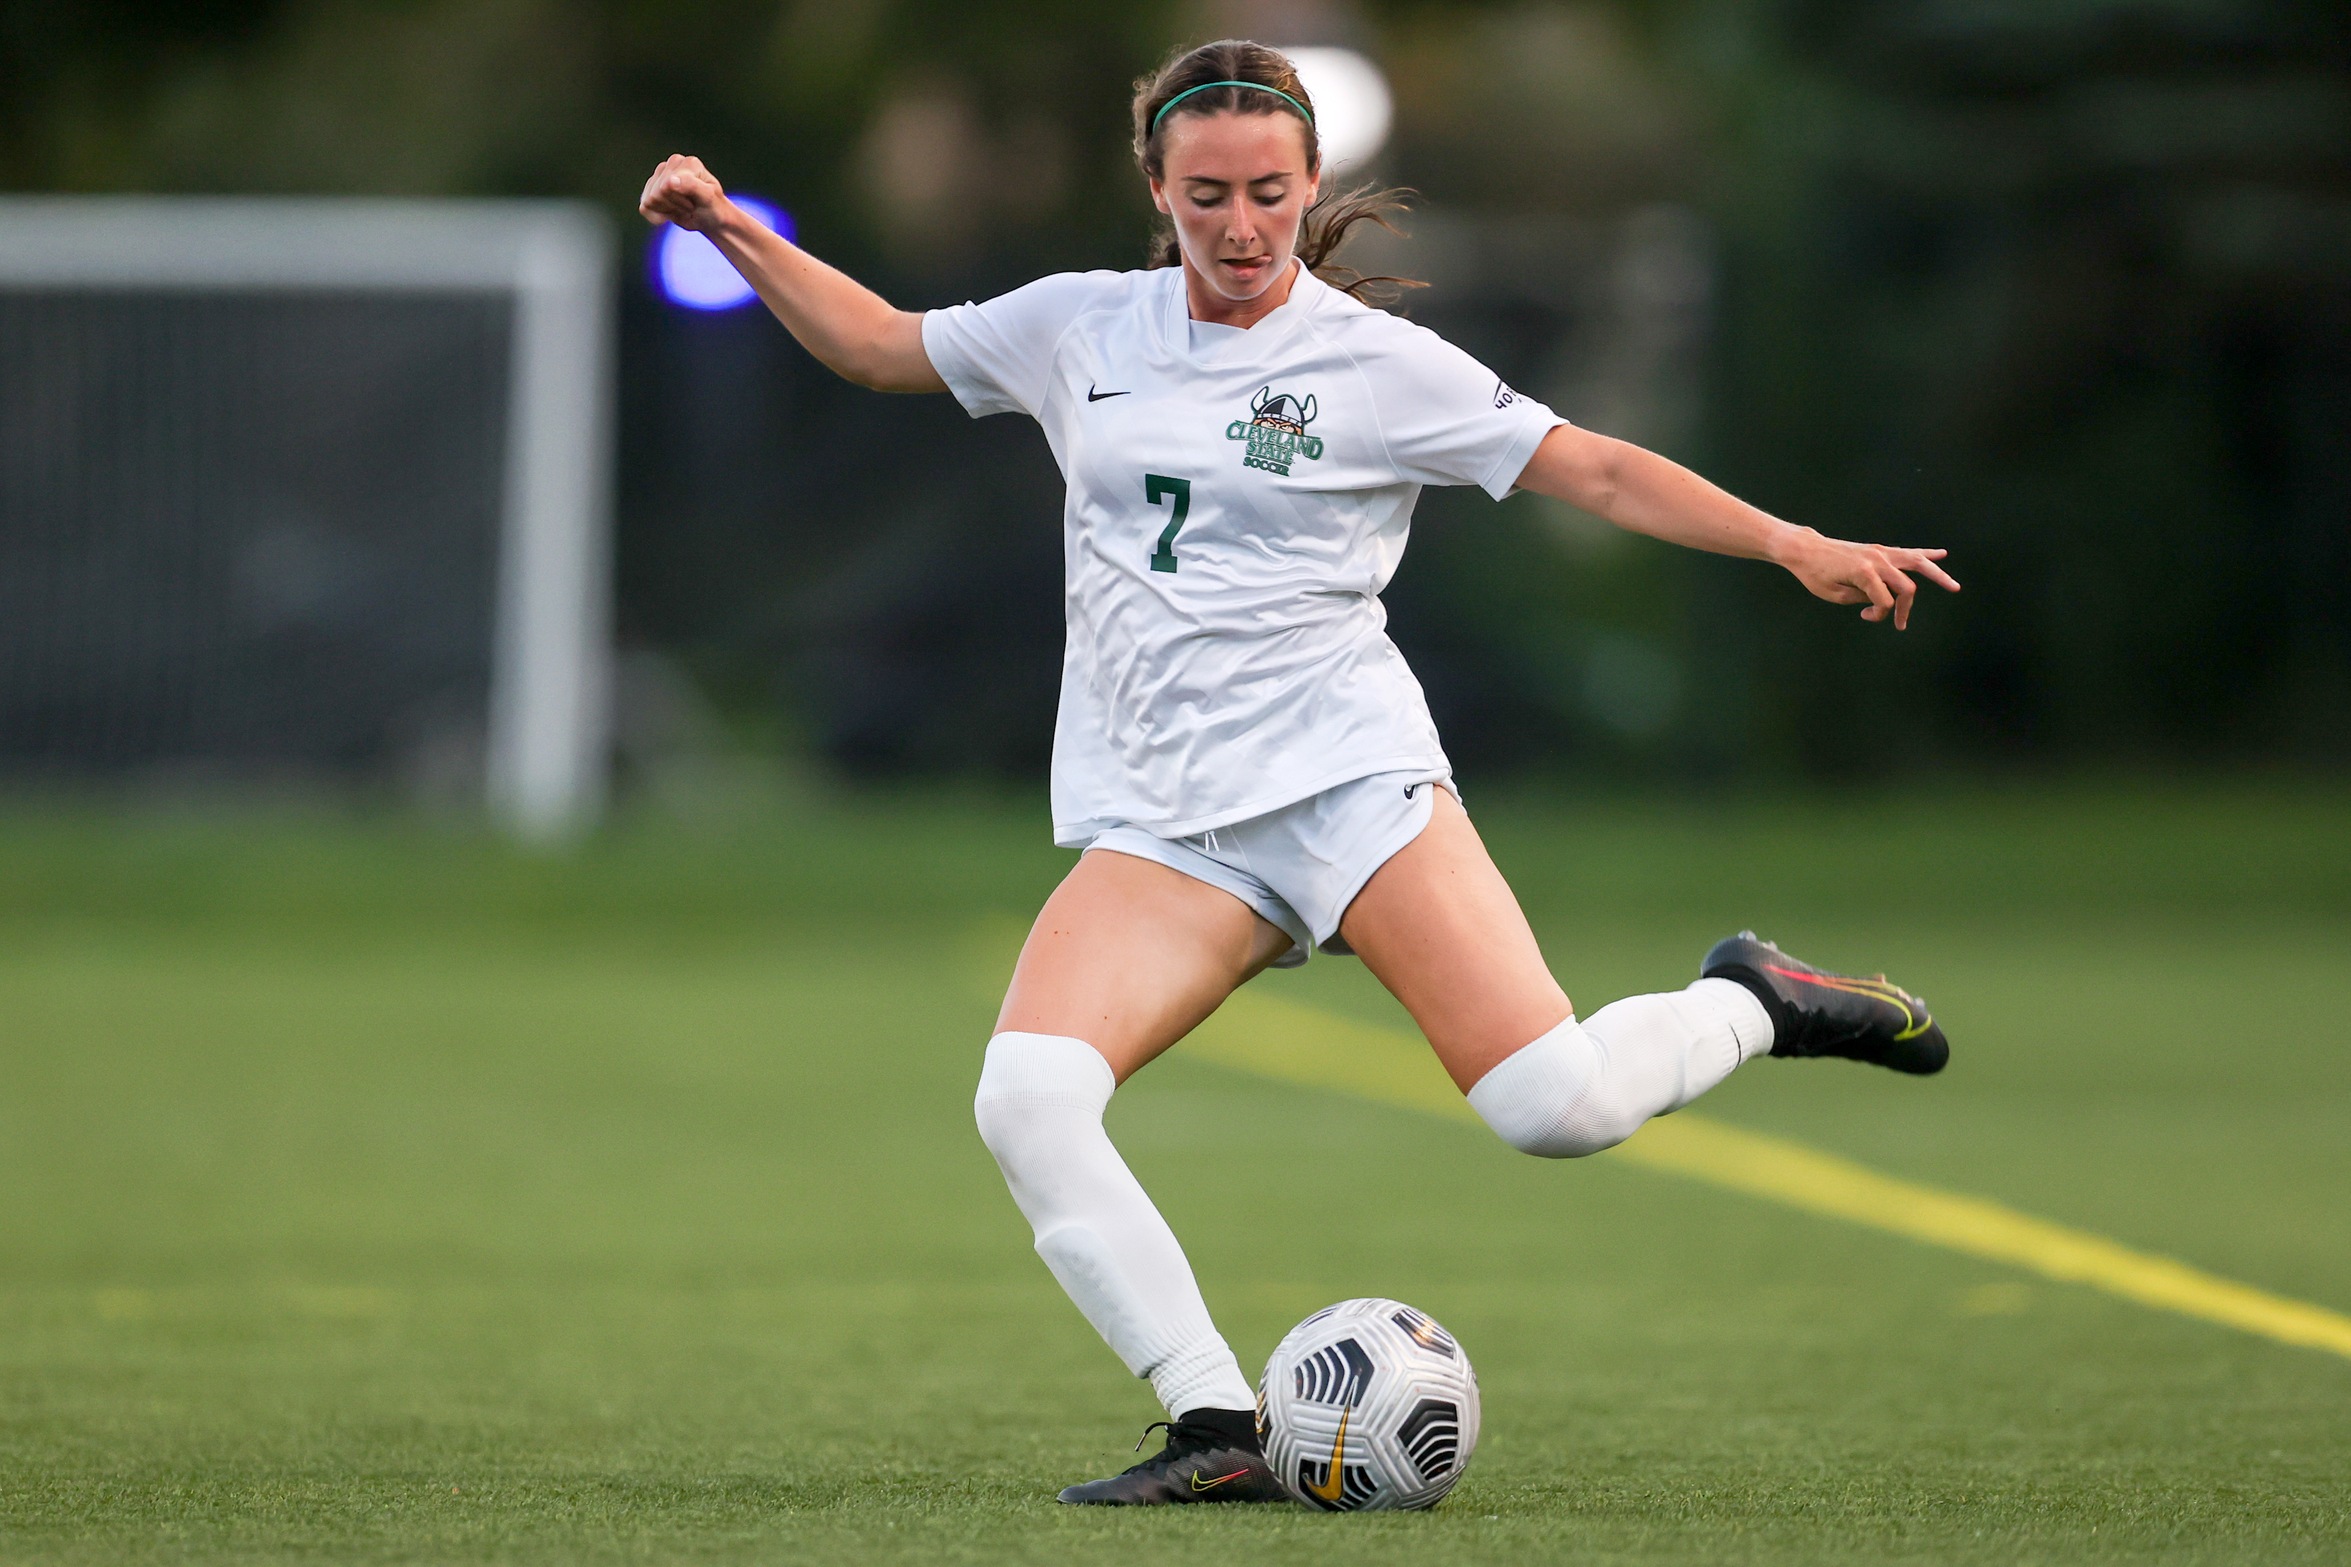 Cleveland State Women's Soccer Faces Green Bay in Horizon League Quarterfinals